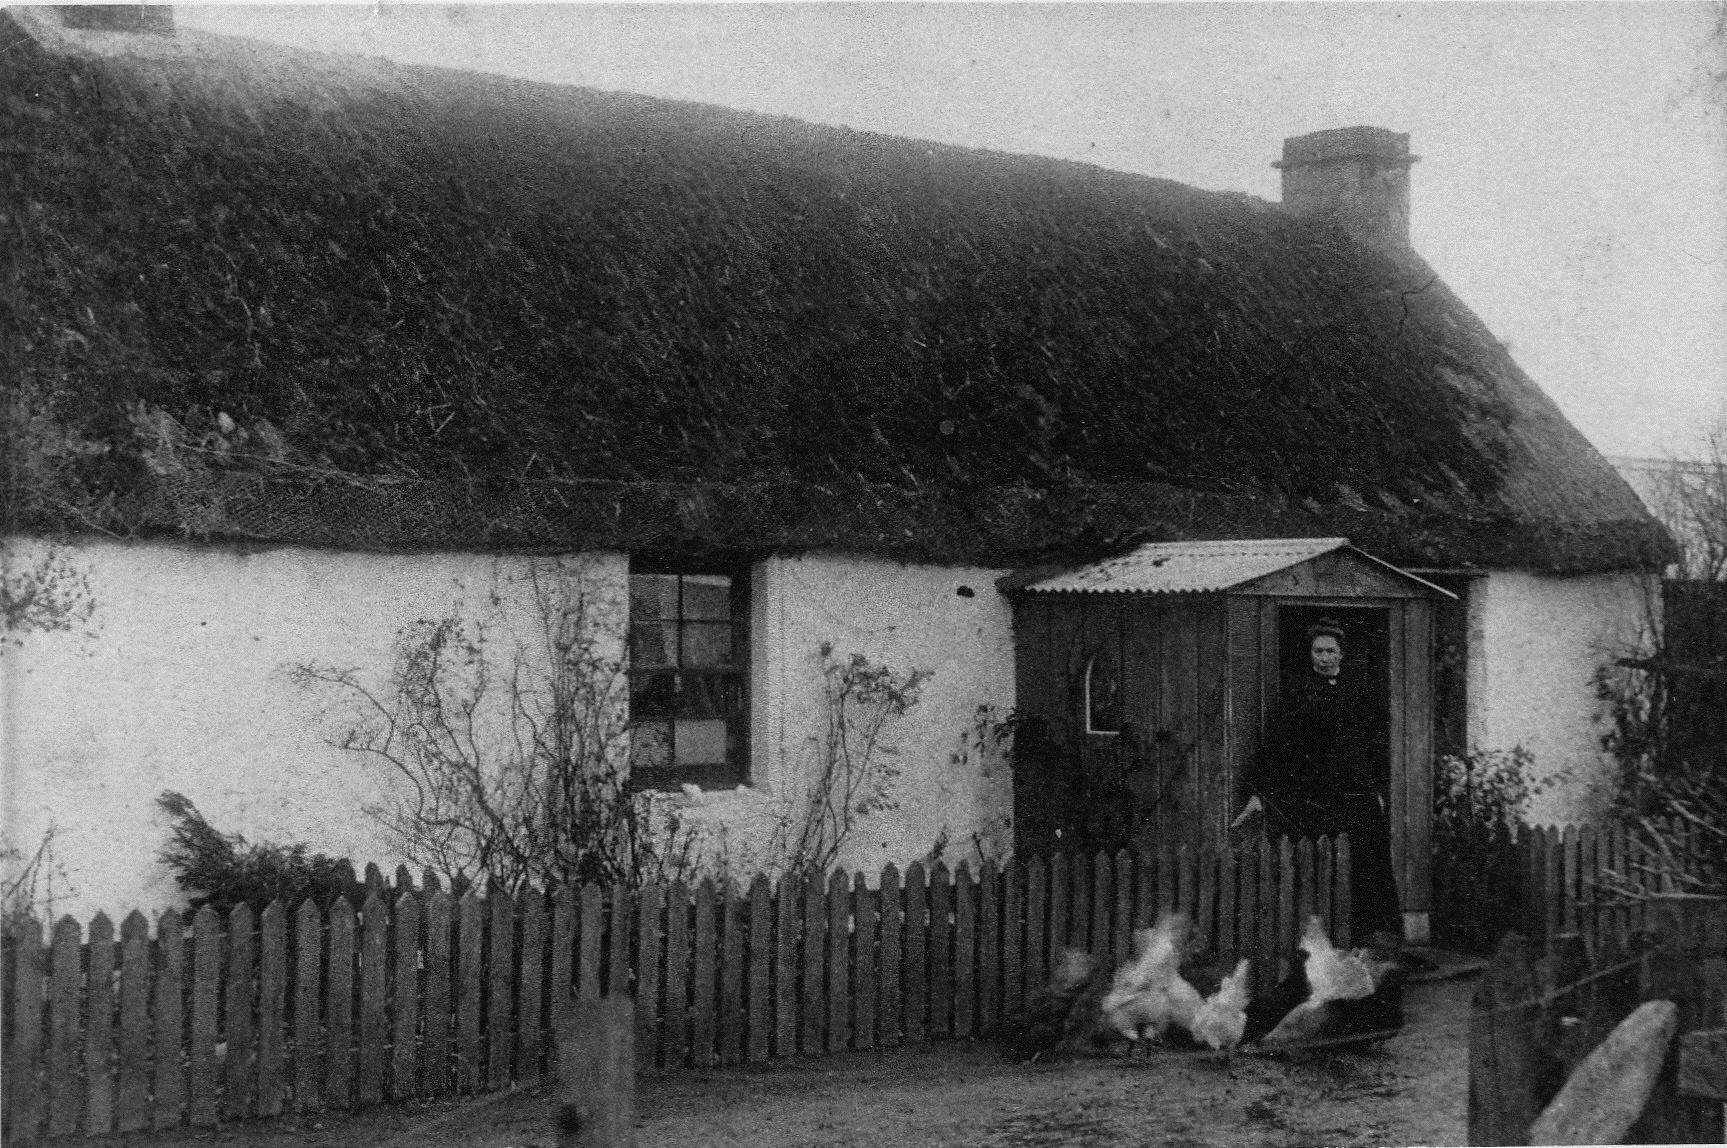 A picture of the village's Elm Cottage, which will be among items in the heritage display.